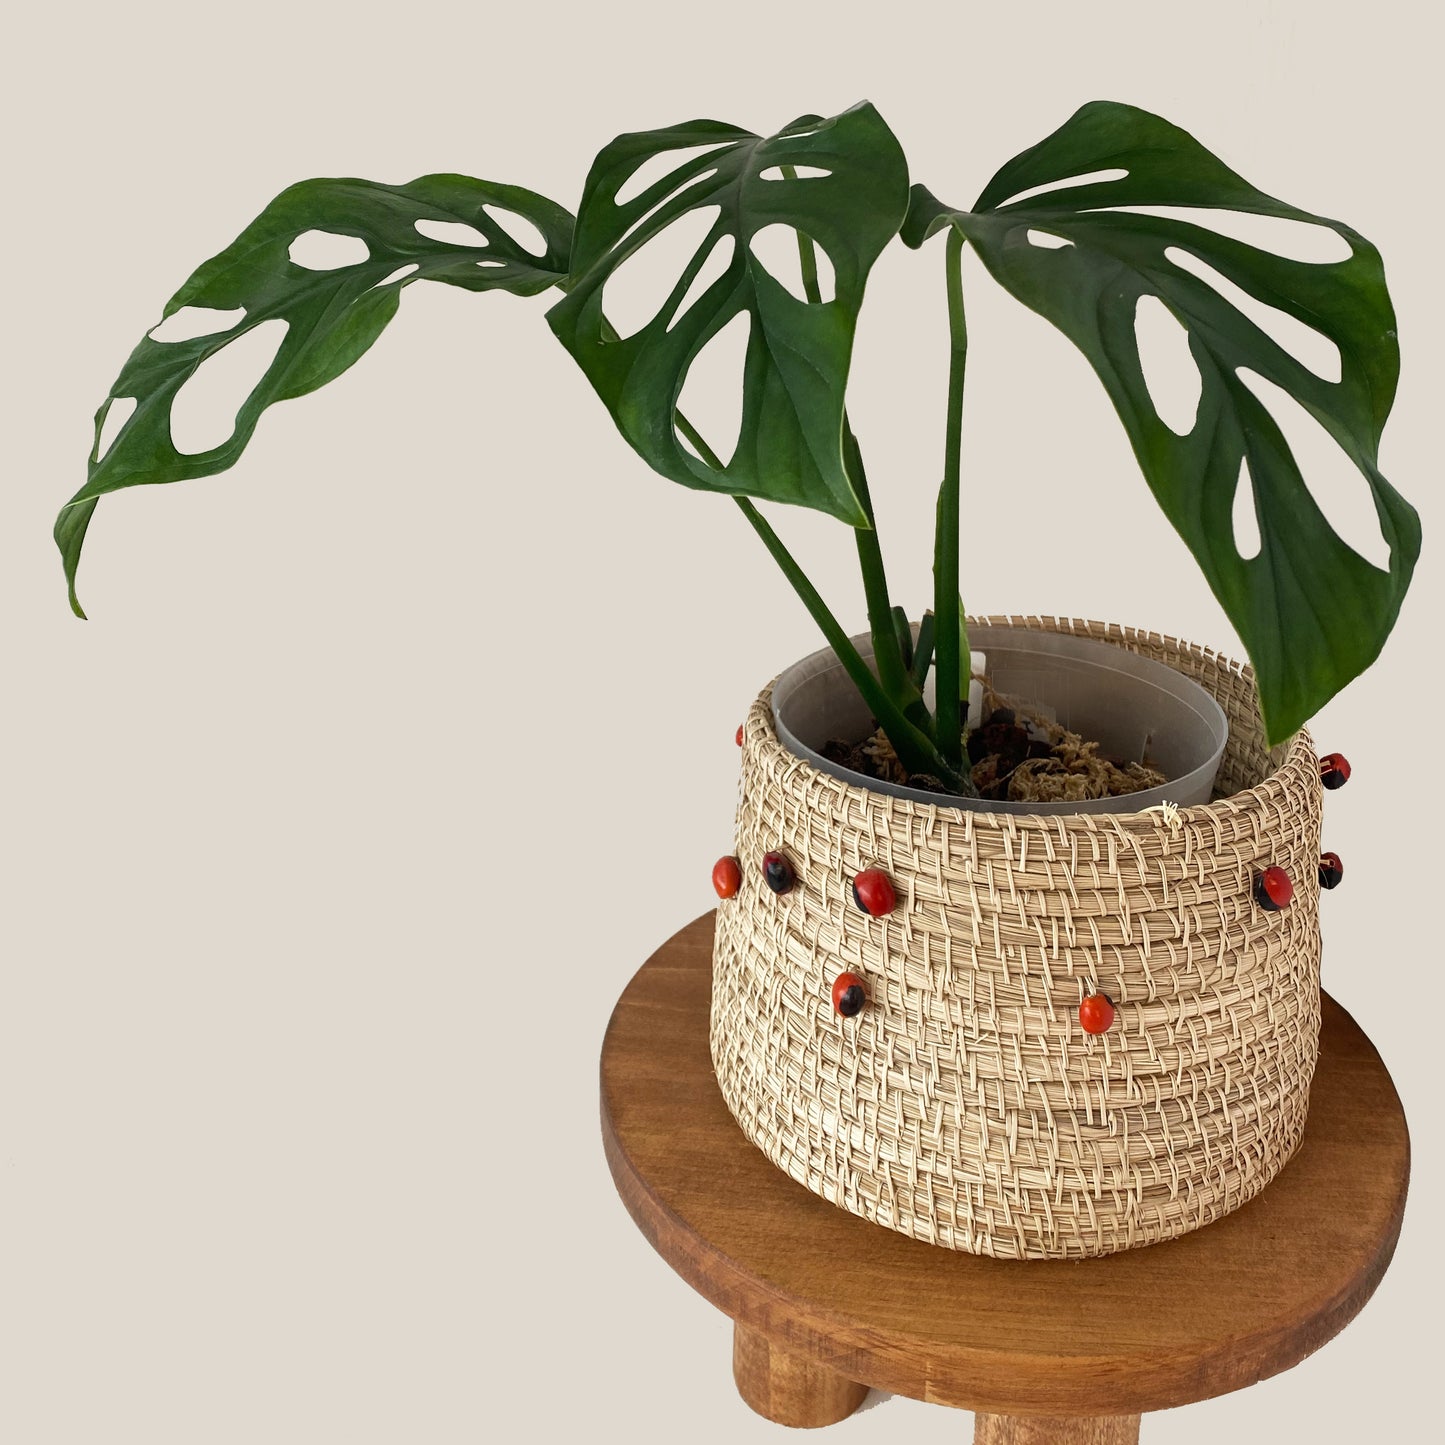 Monstera Lechleriana in Small Size, available in Canada